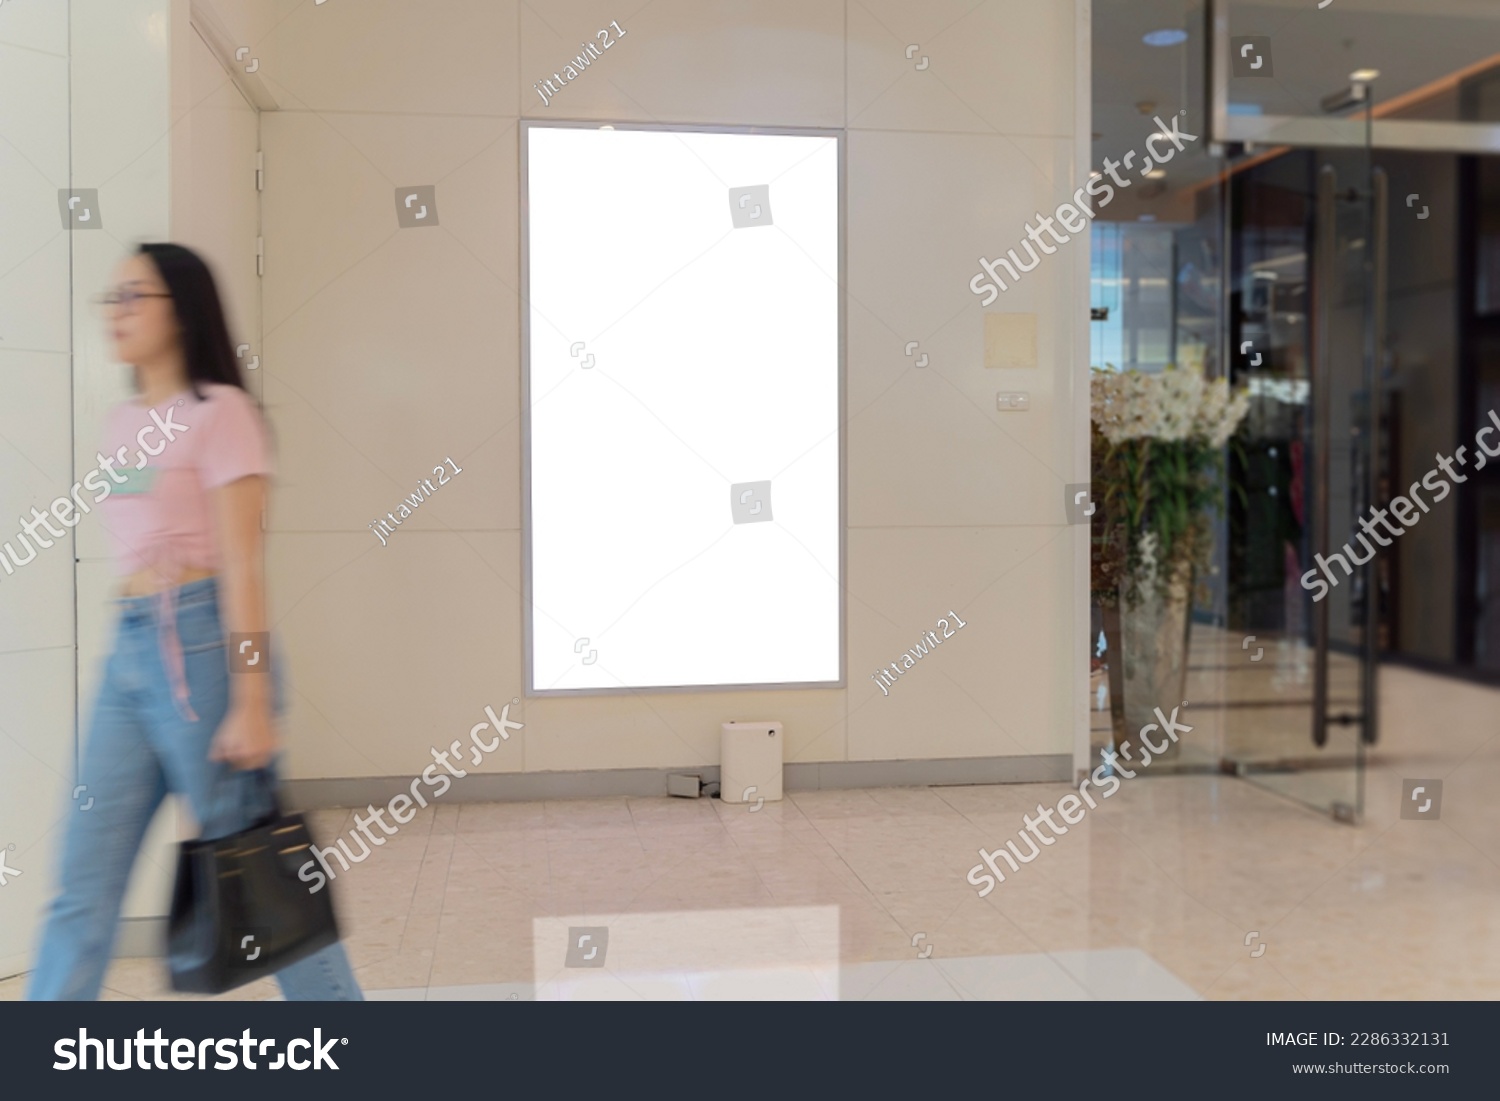 Digital advertisiment in shopping mall mockup. Blank billboards located in shopping malls or retail stores, useful for your advertising, with clipping paths. #2286332131